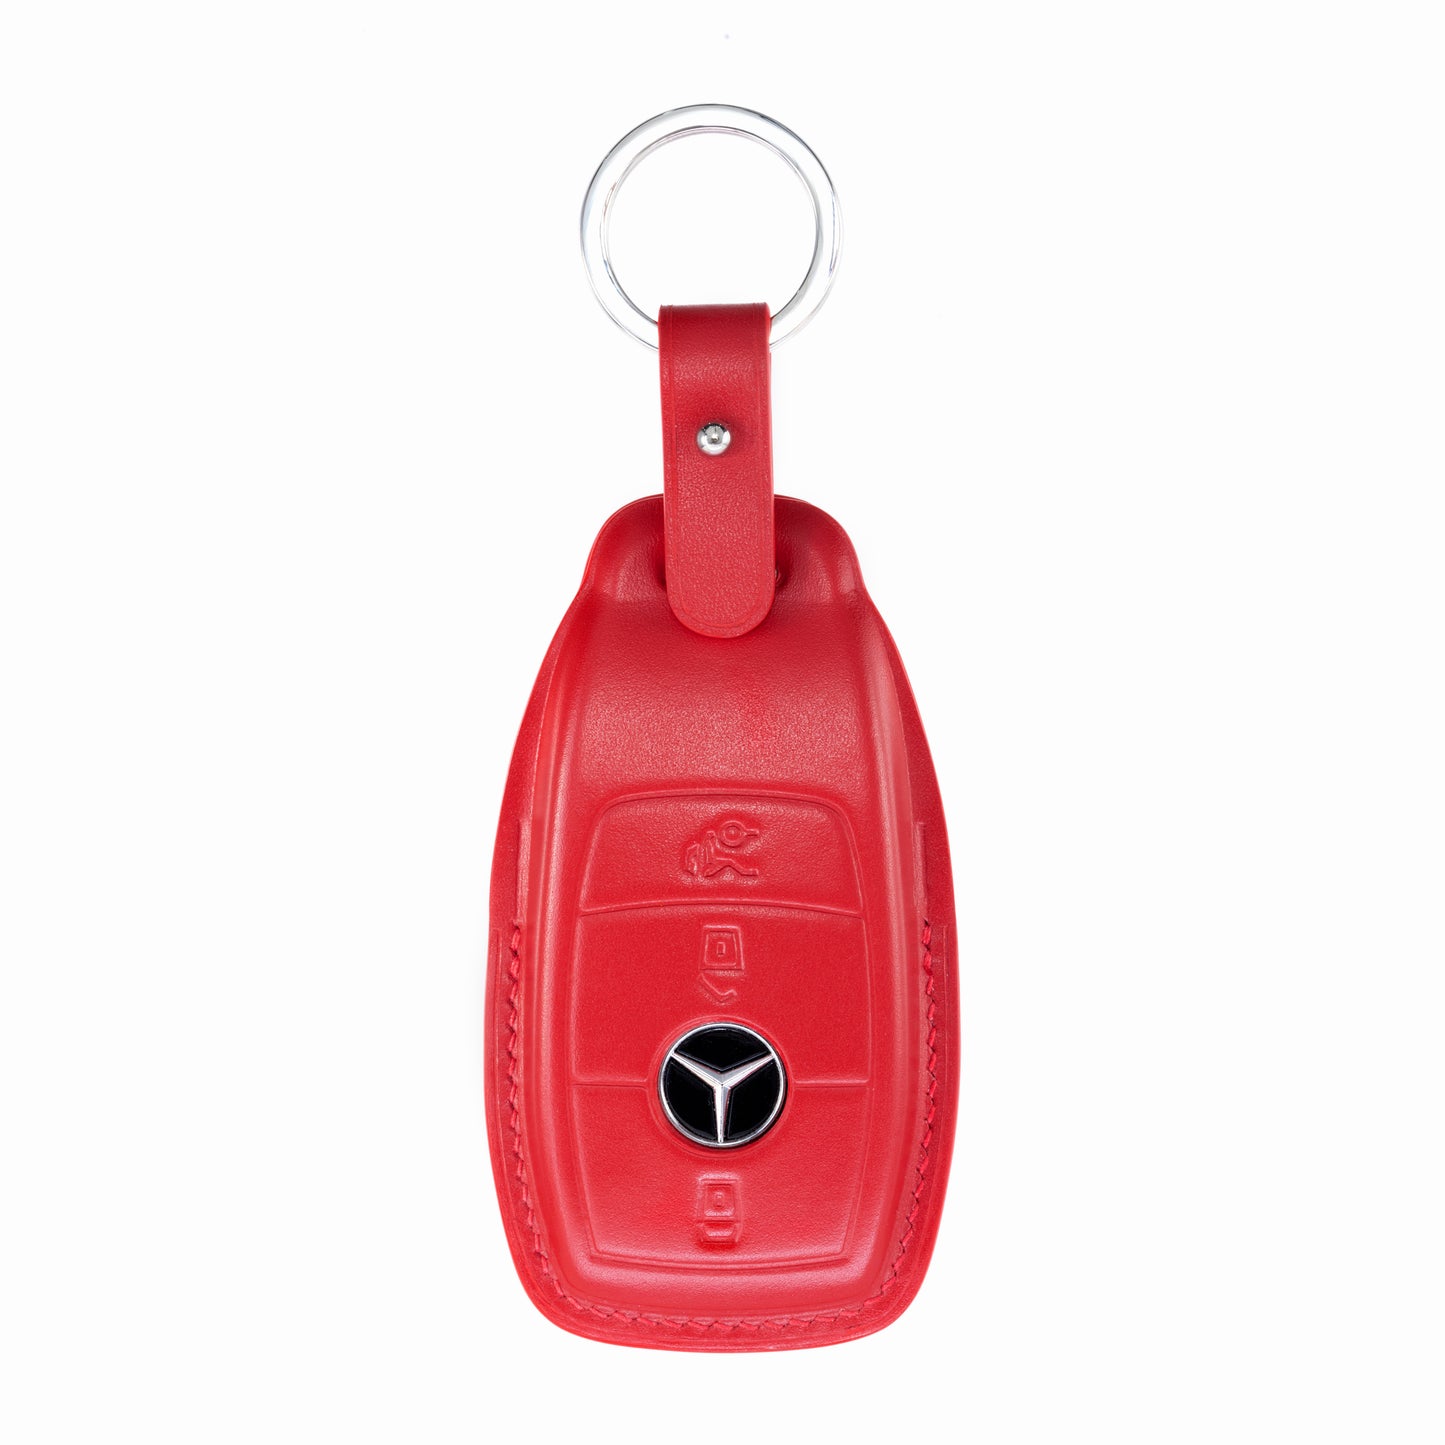 Mercedes E Class Key Fob Cover in Red Nappa